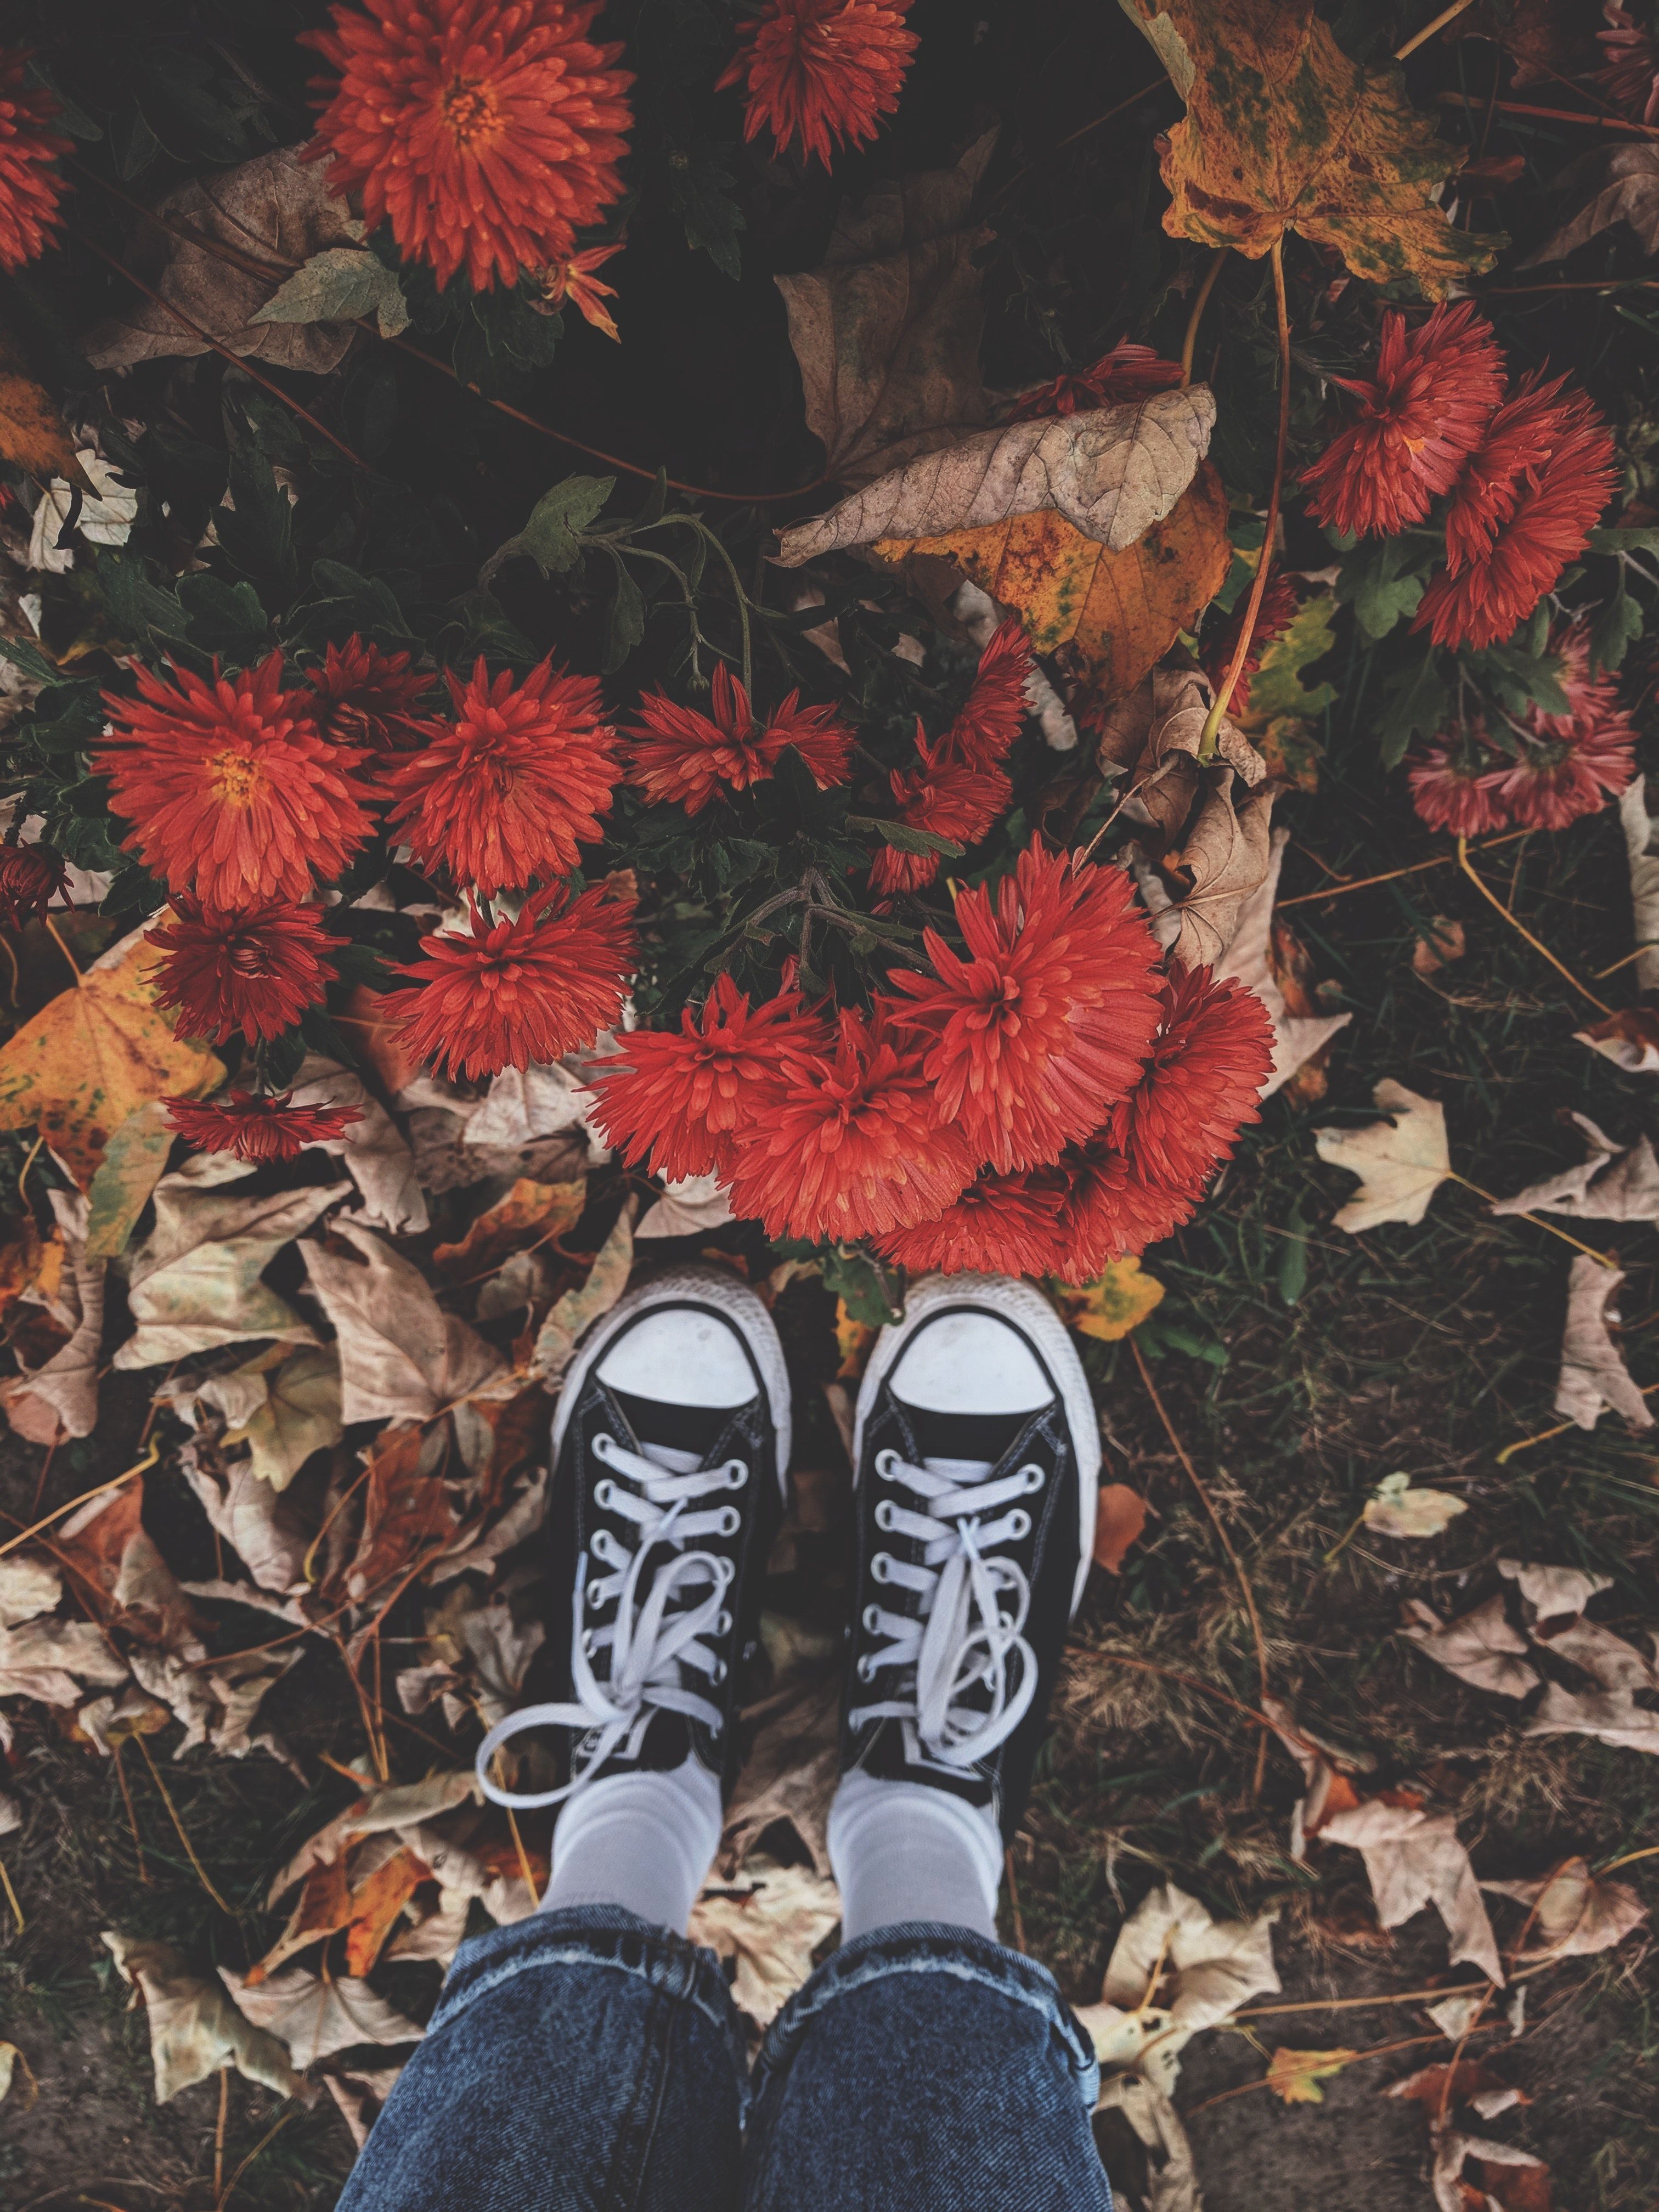 A person is standing on top of leaves - Shoes, Converse